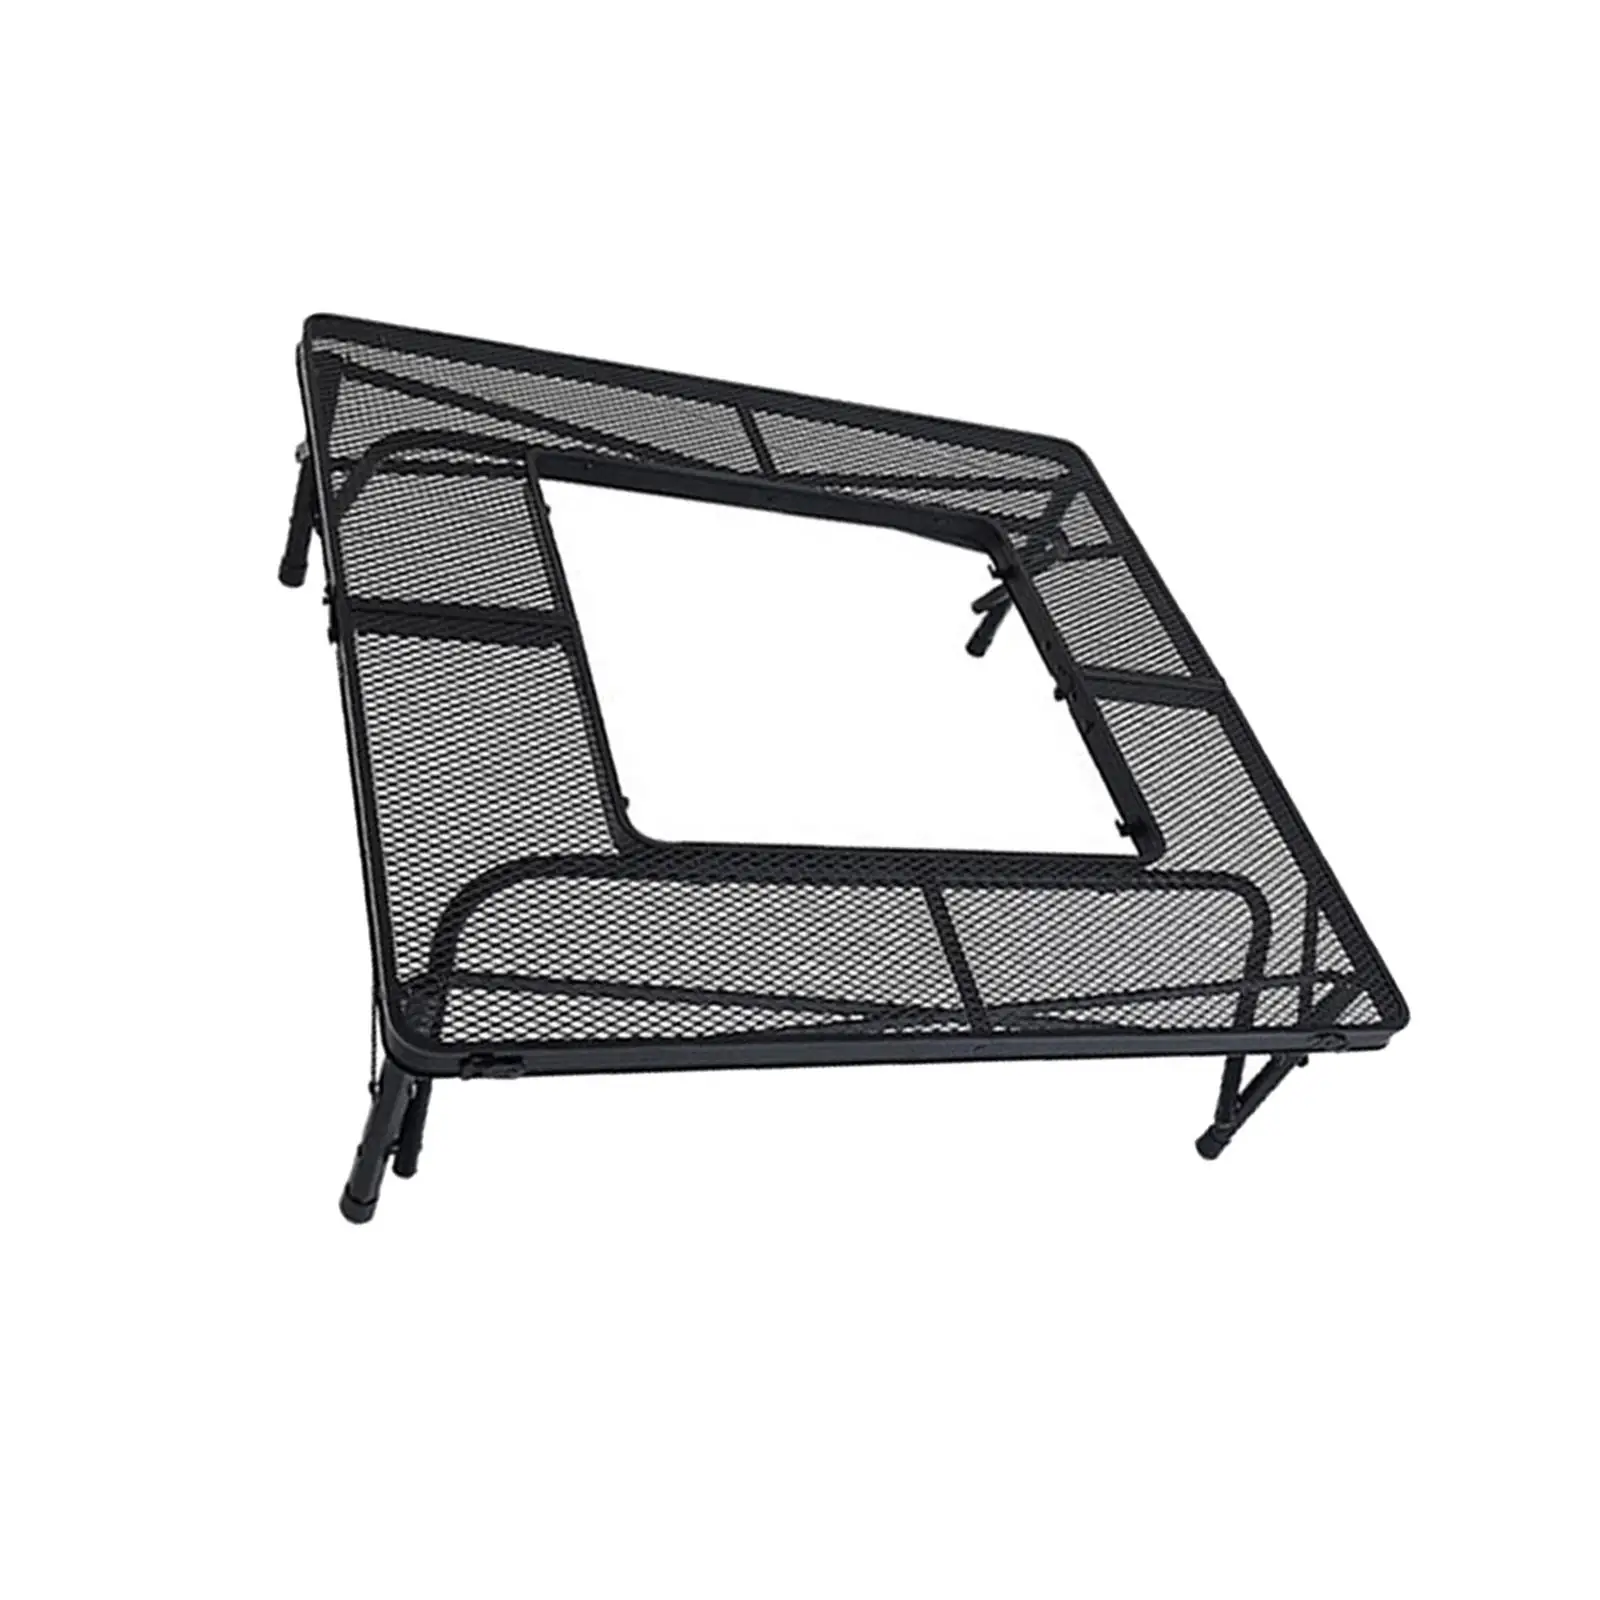 Outdoor Foldable Table with A Carry Bag Camping Tables Portable Grill Table for Park Mountaineering Living Room BBQ Travel